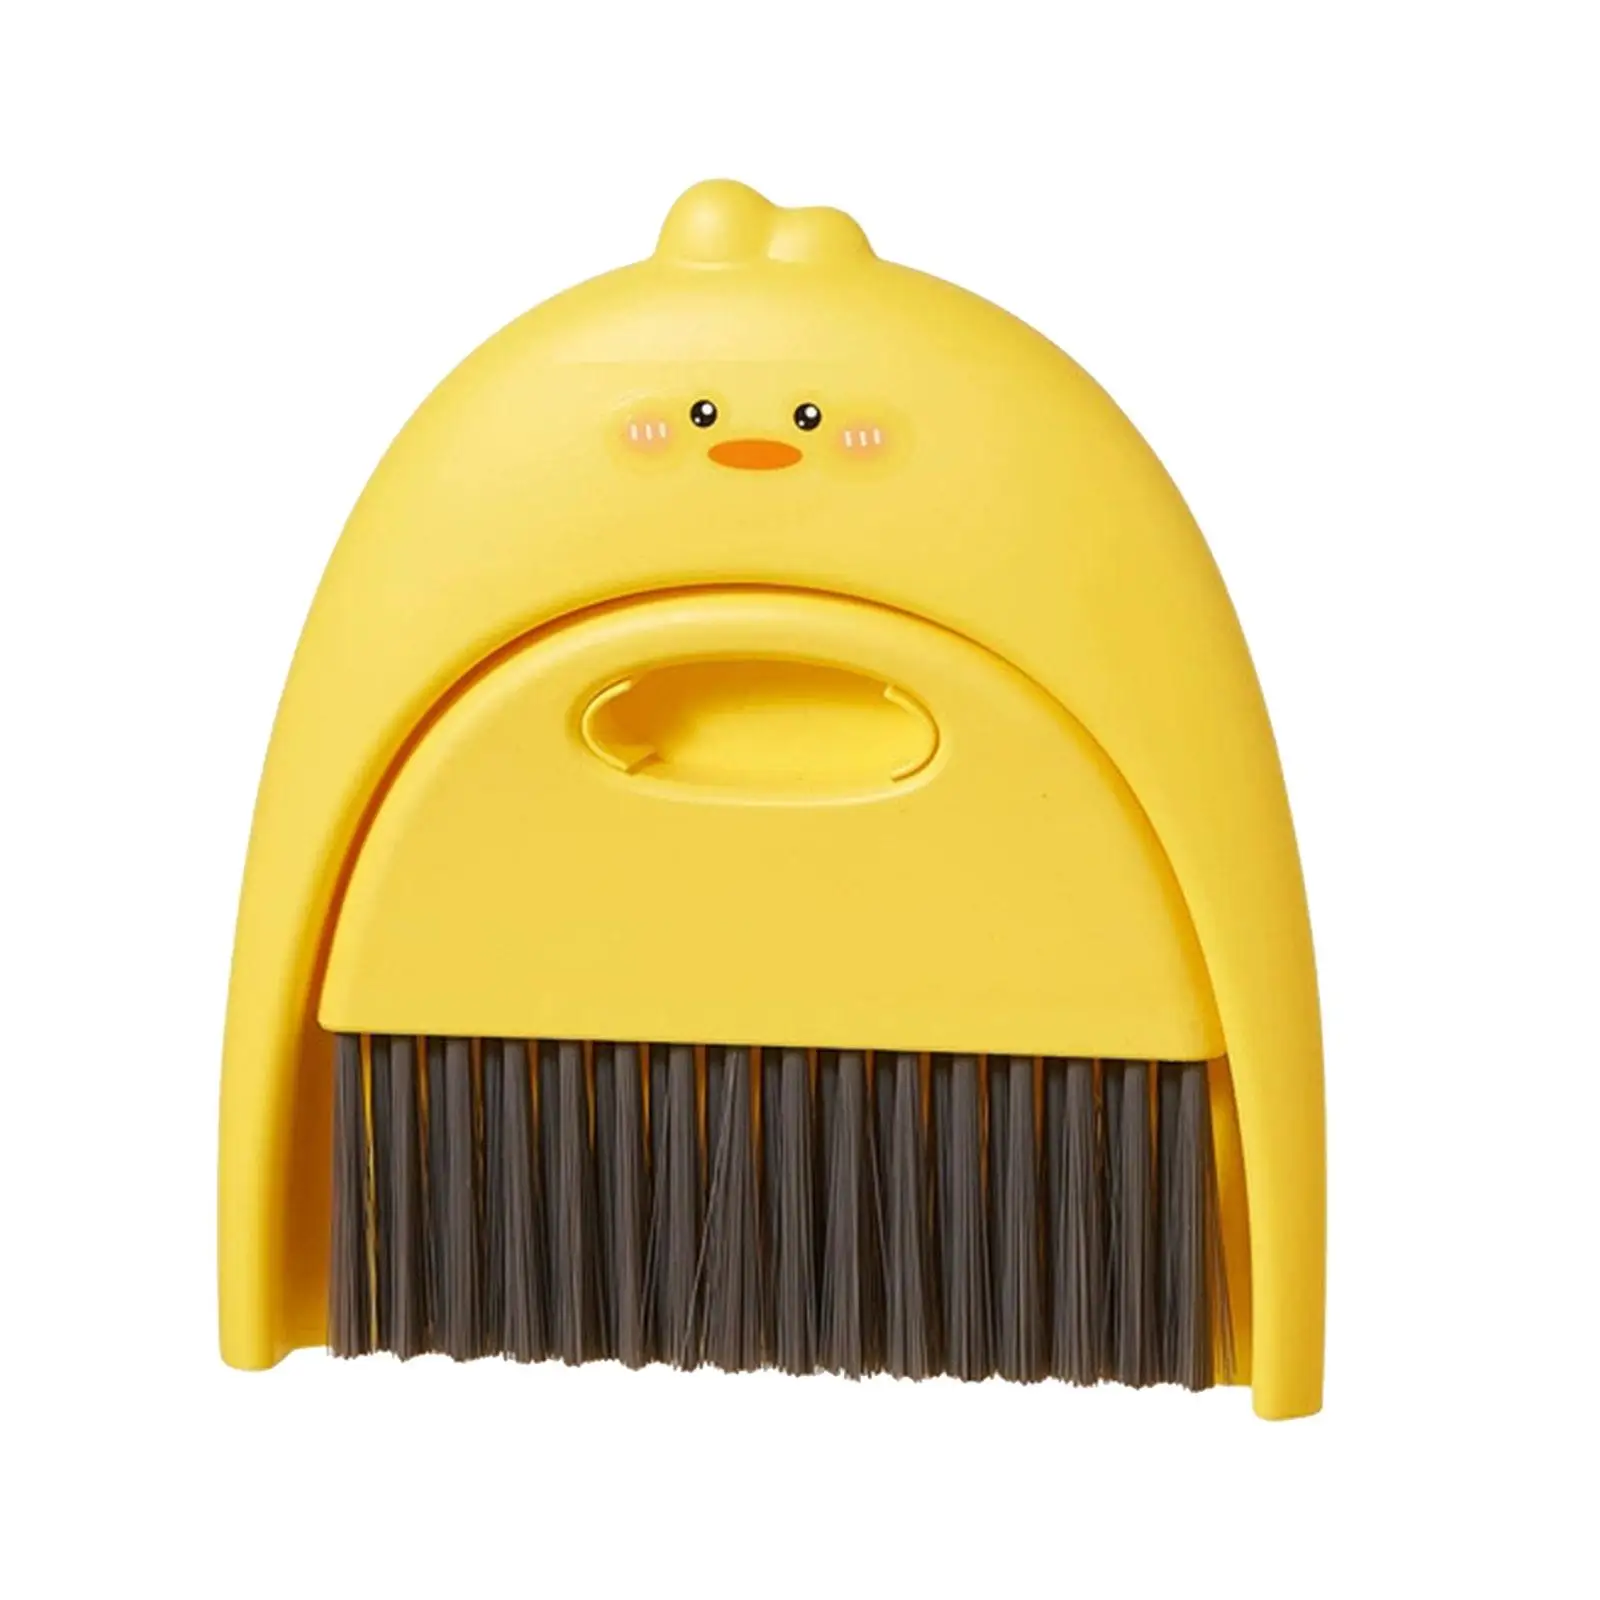 Mini Broom and Dustpan Set Mini Desktop Yellow Duck Cleaning Set for Sofa Cleaning for Little Housekeeping Helper Sets for Kids